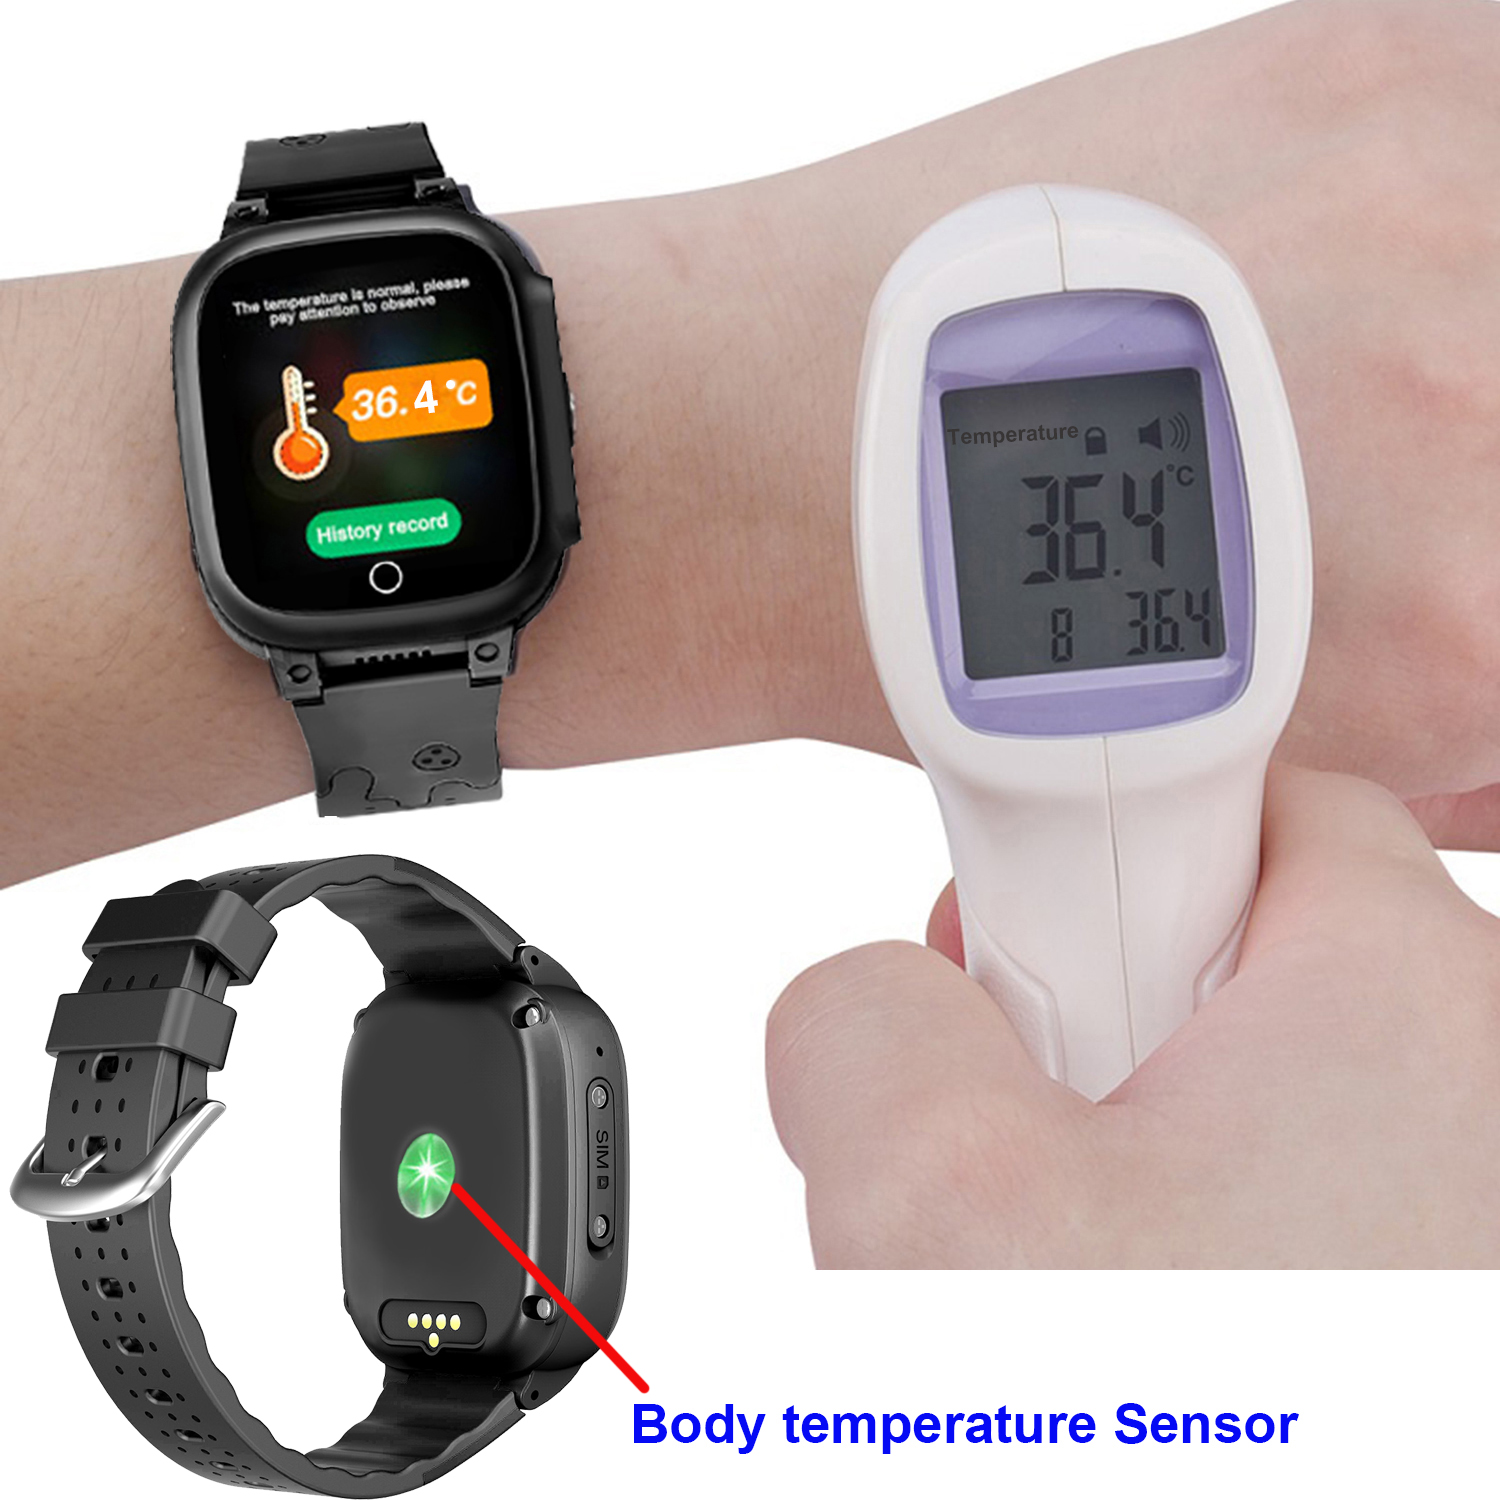 IP67 Waterproof safety 4G GPS Senior Smart Tracker Watch with Thermometer D51S